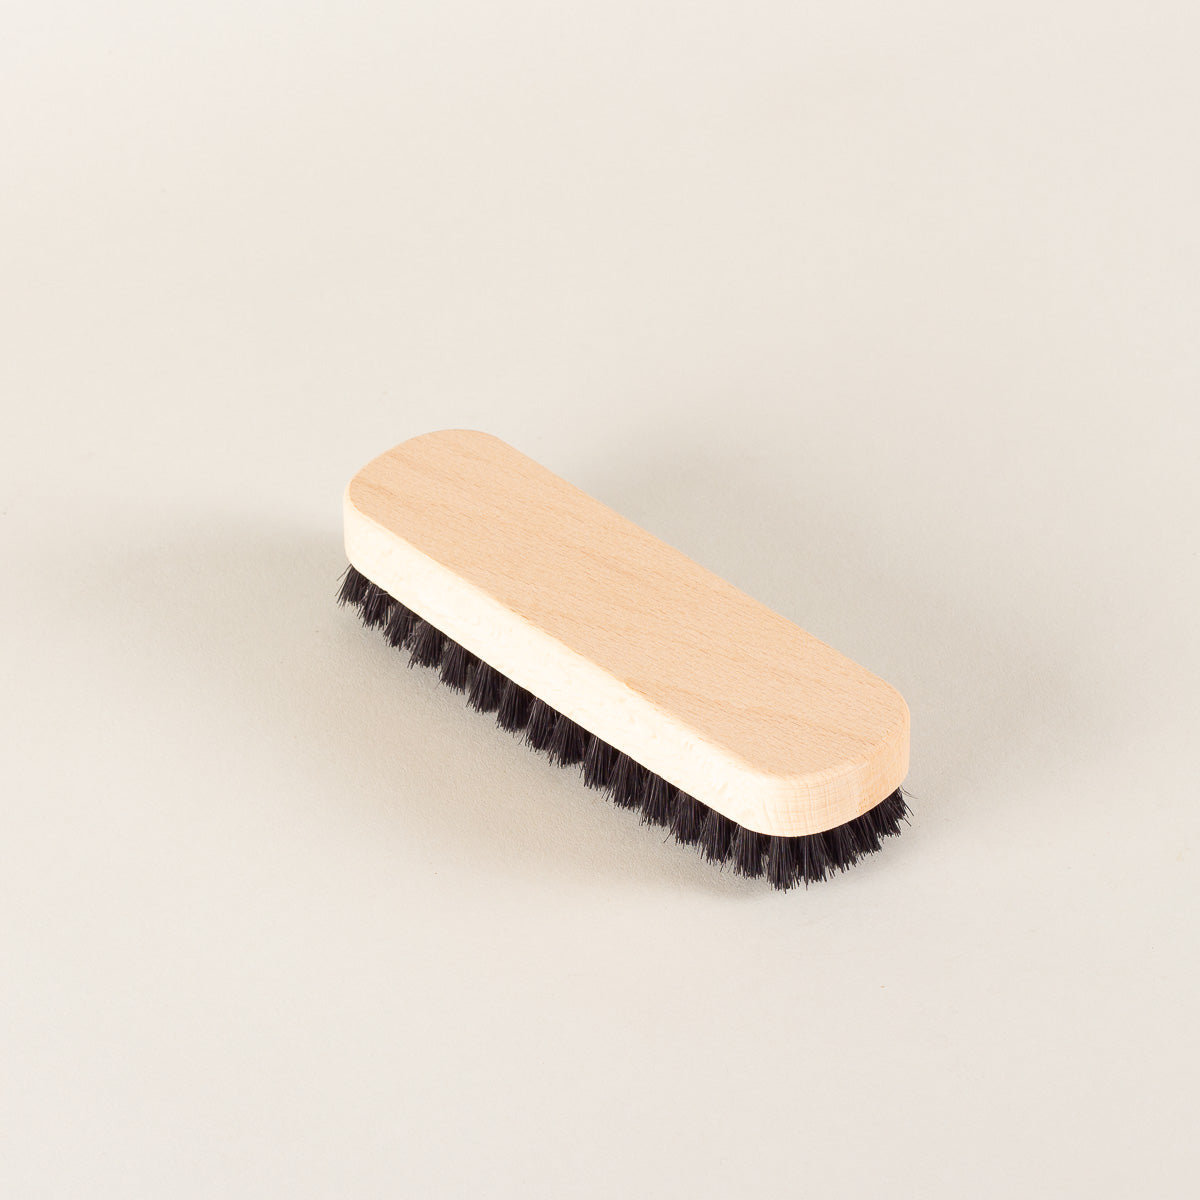 The Shoe Care Shop Shoe cleaning brush